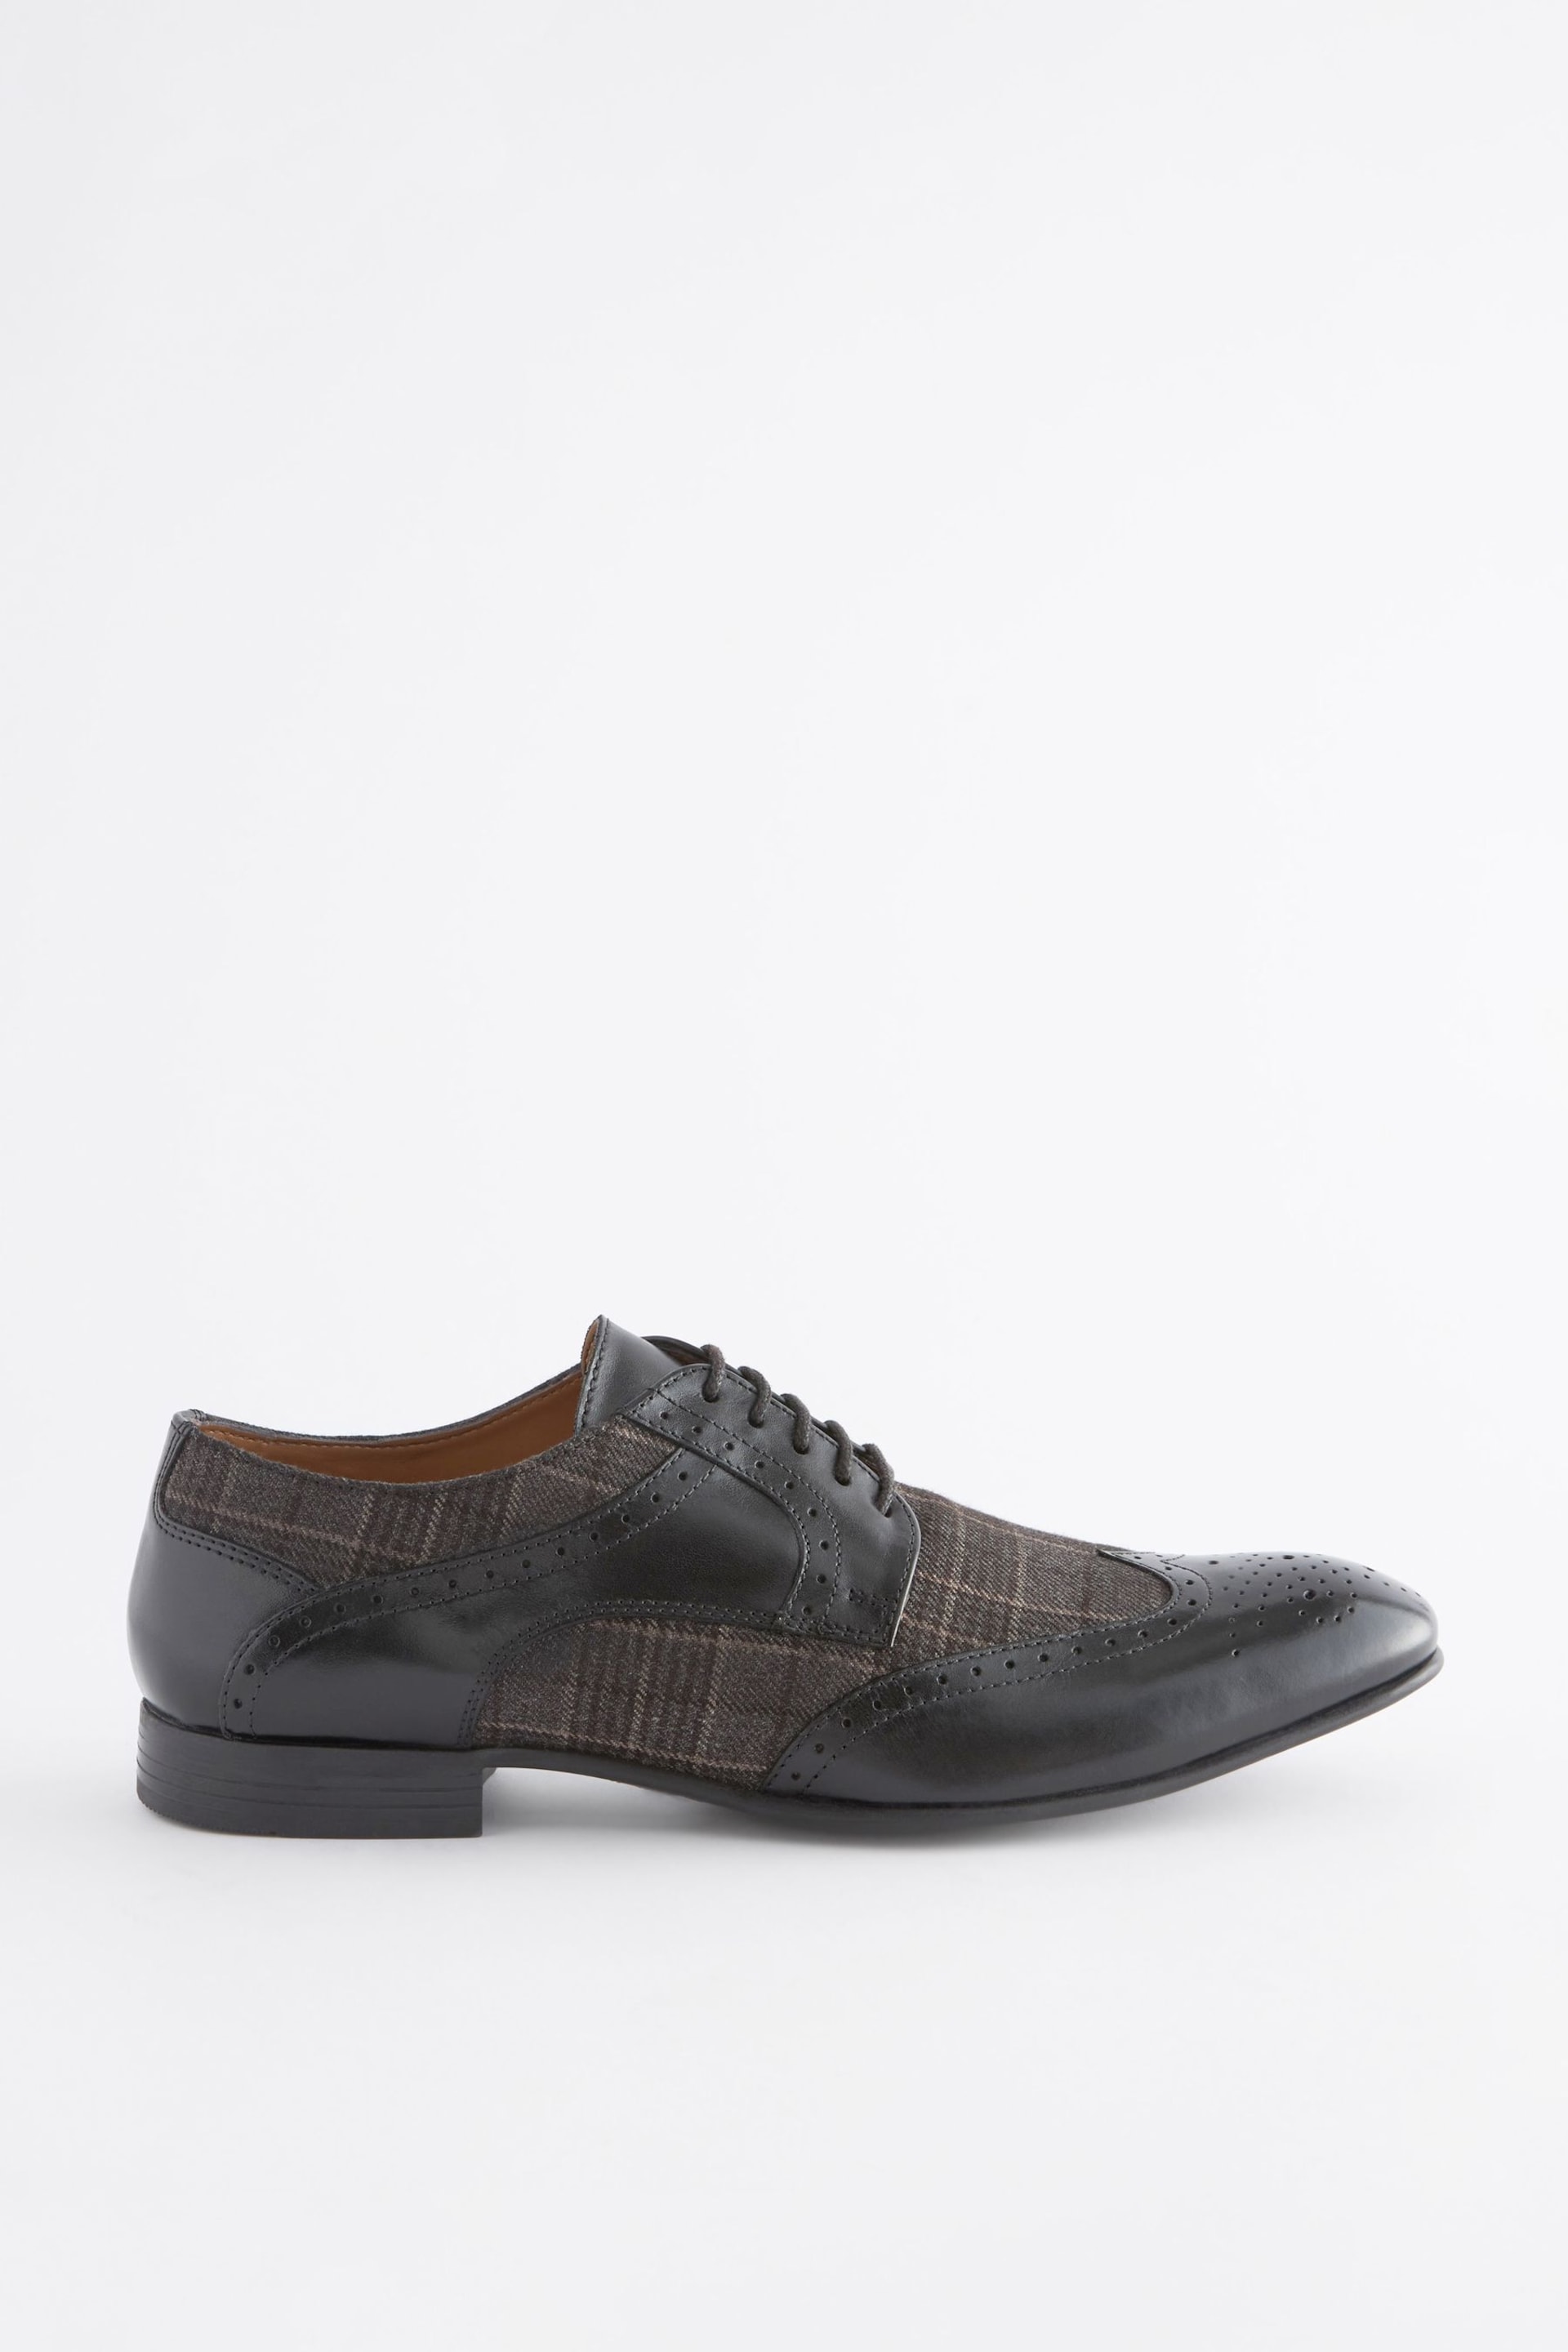 Black Leather & Check Brogue Shoes - Image 3 of 7